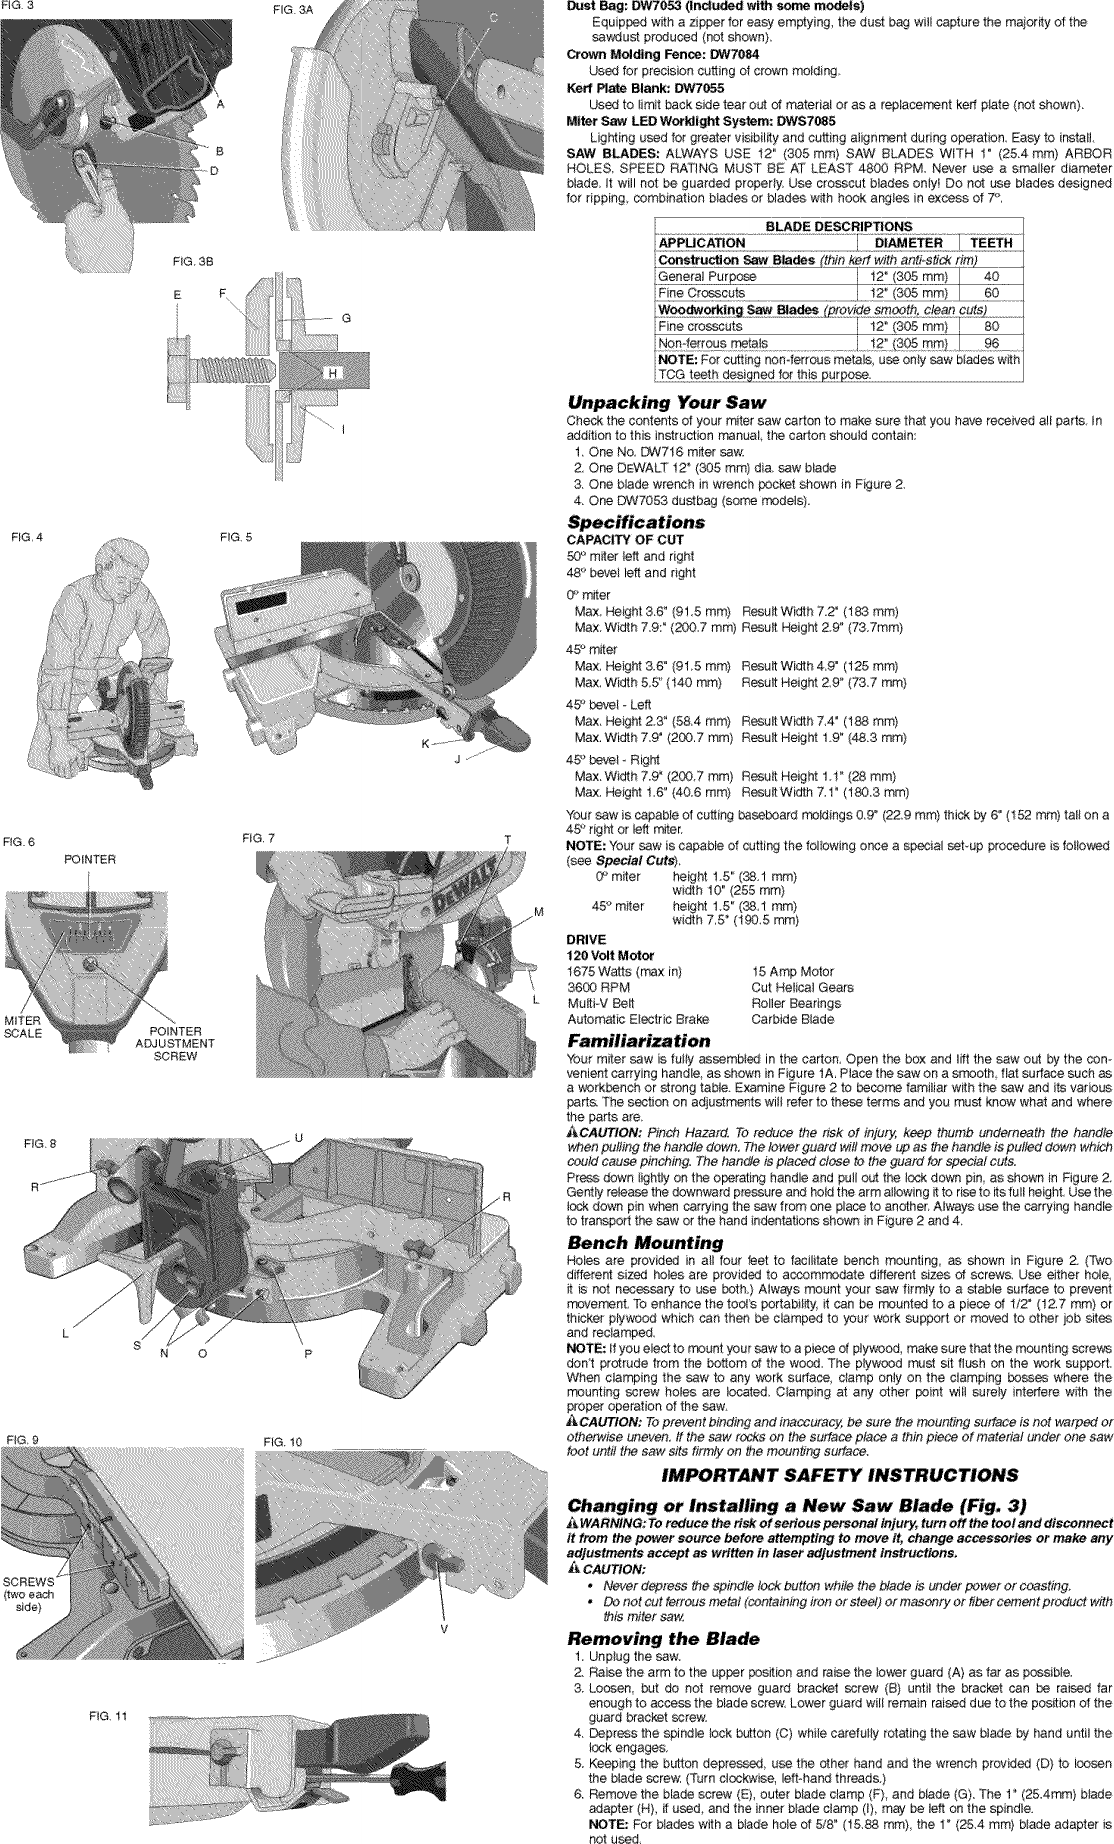 Page 3 of 7 - Dewalt DW716 TYPE3 User Manual  MITER SAW - Manuals And Guides 1301211L